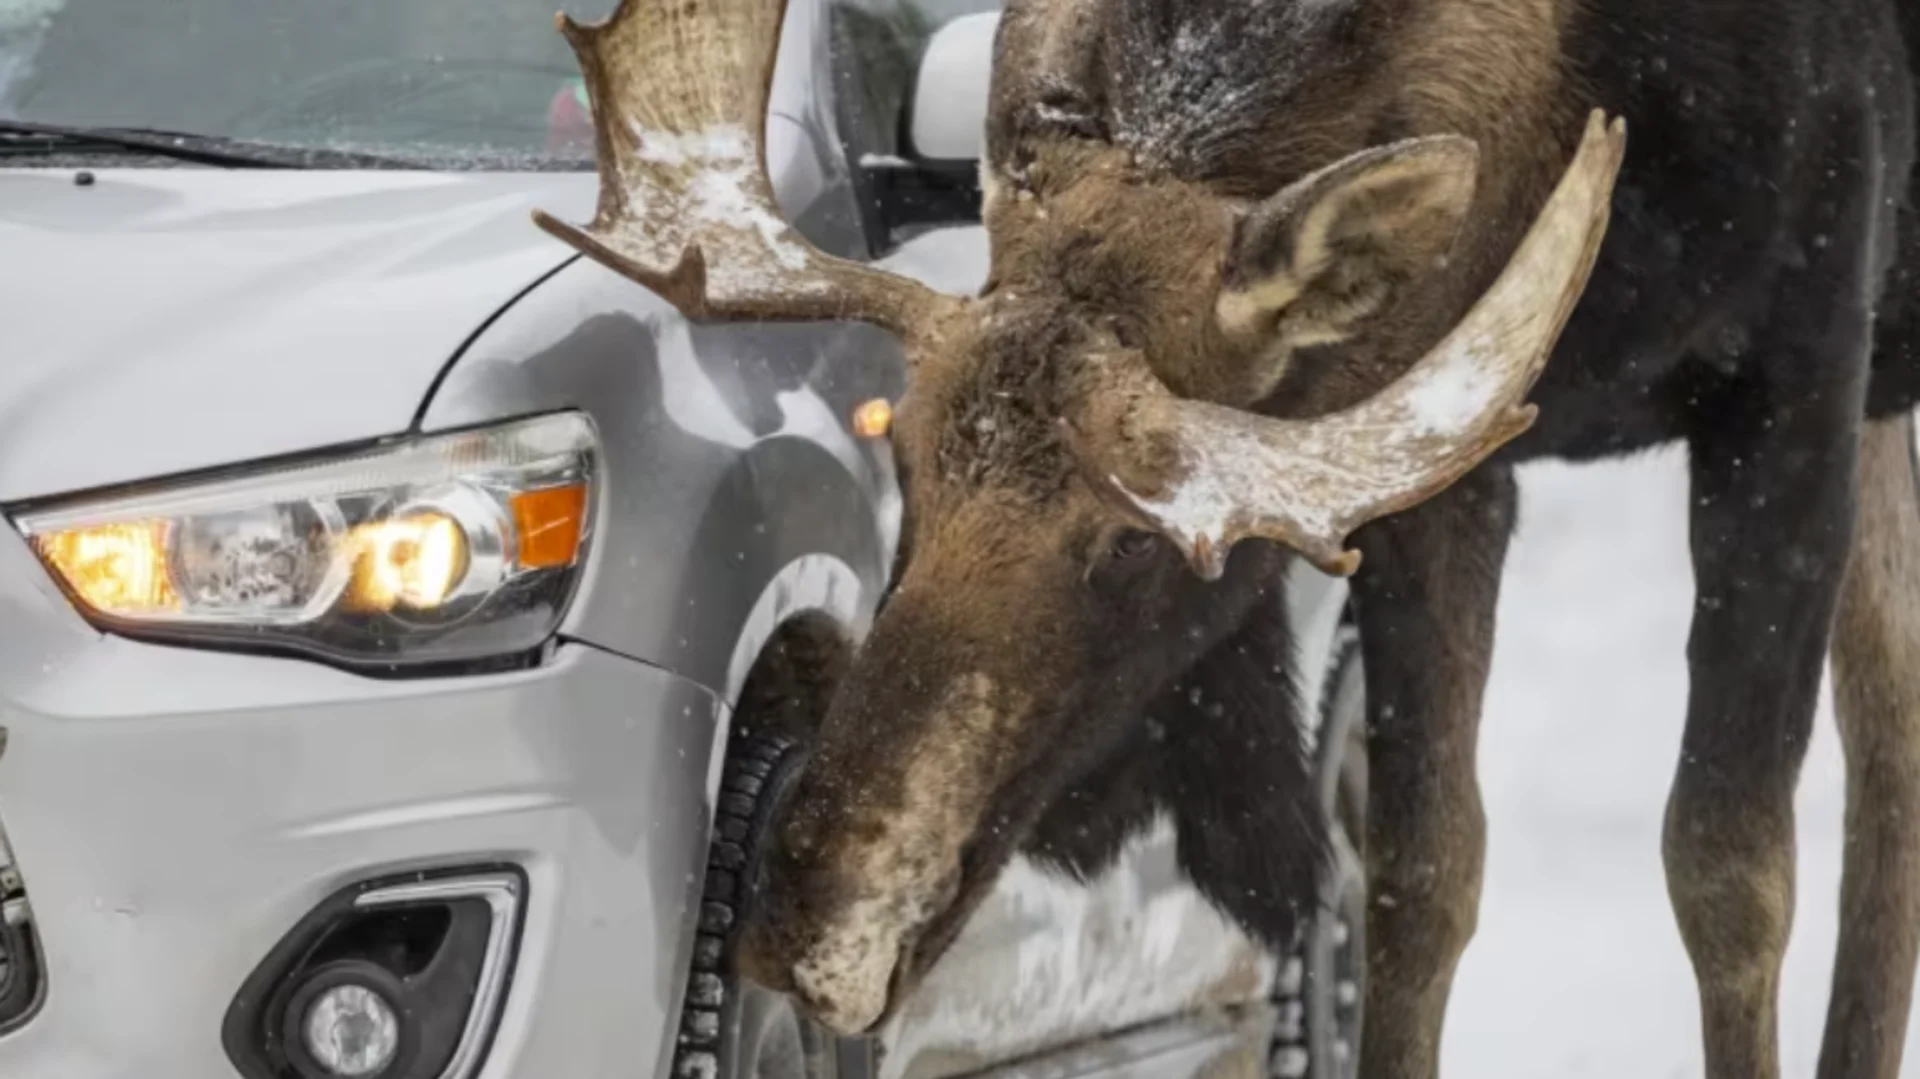 'Try not to let moose lick your car,' warns officials, as moose take to highways